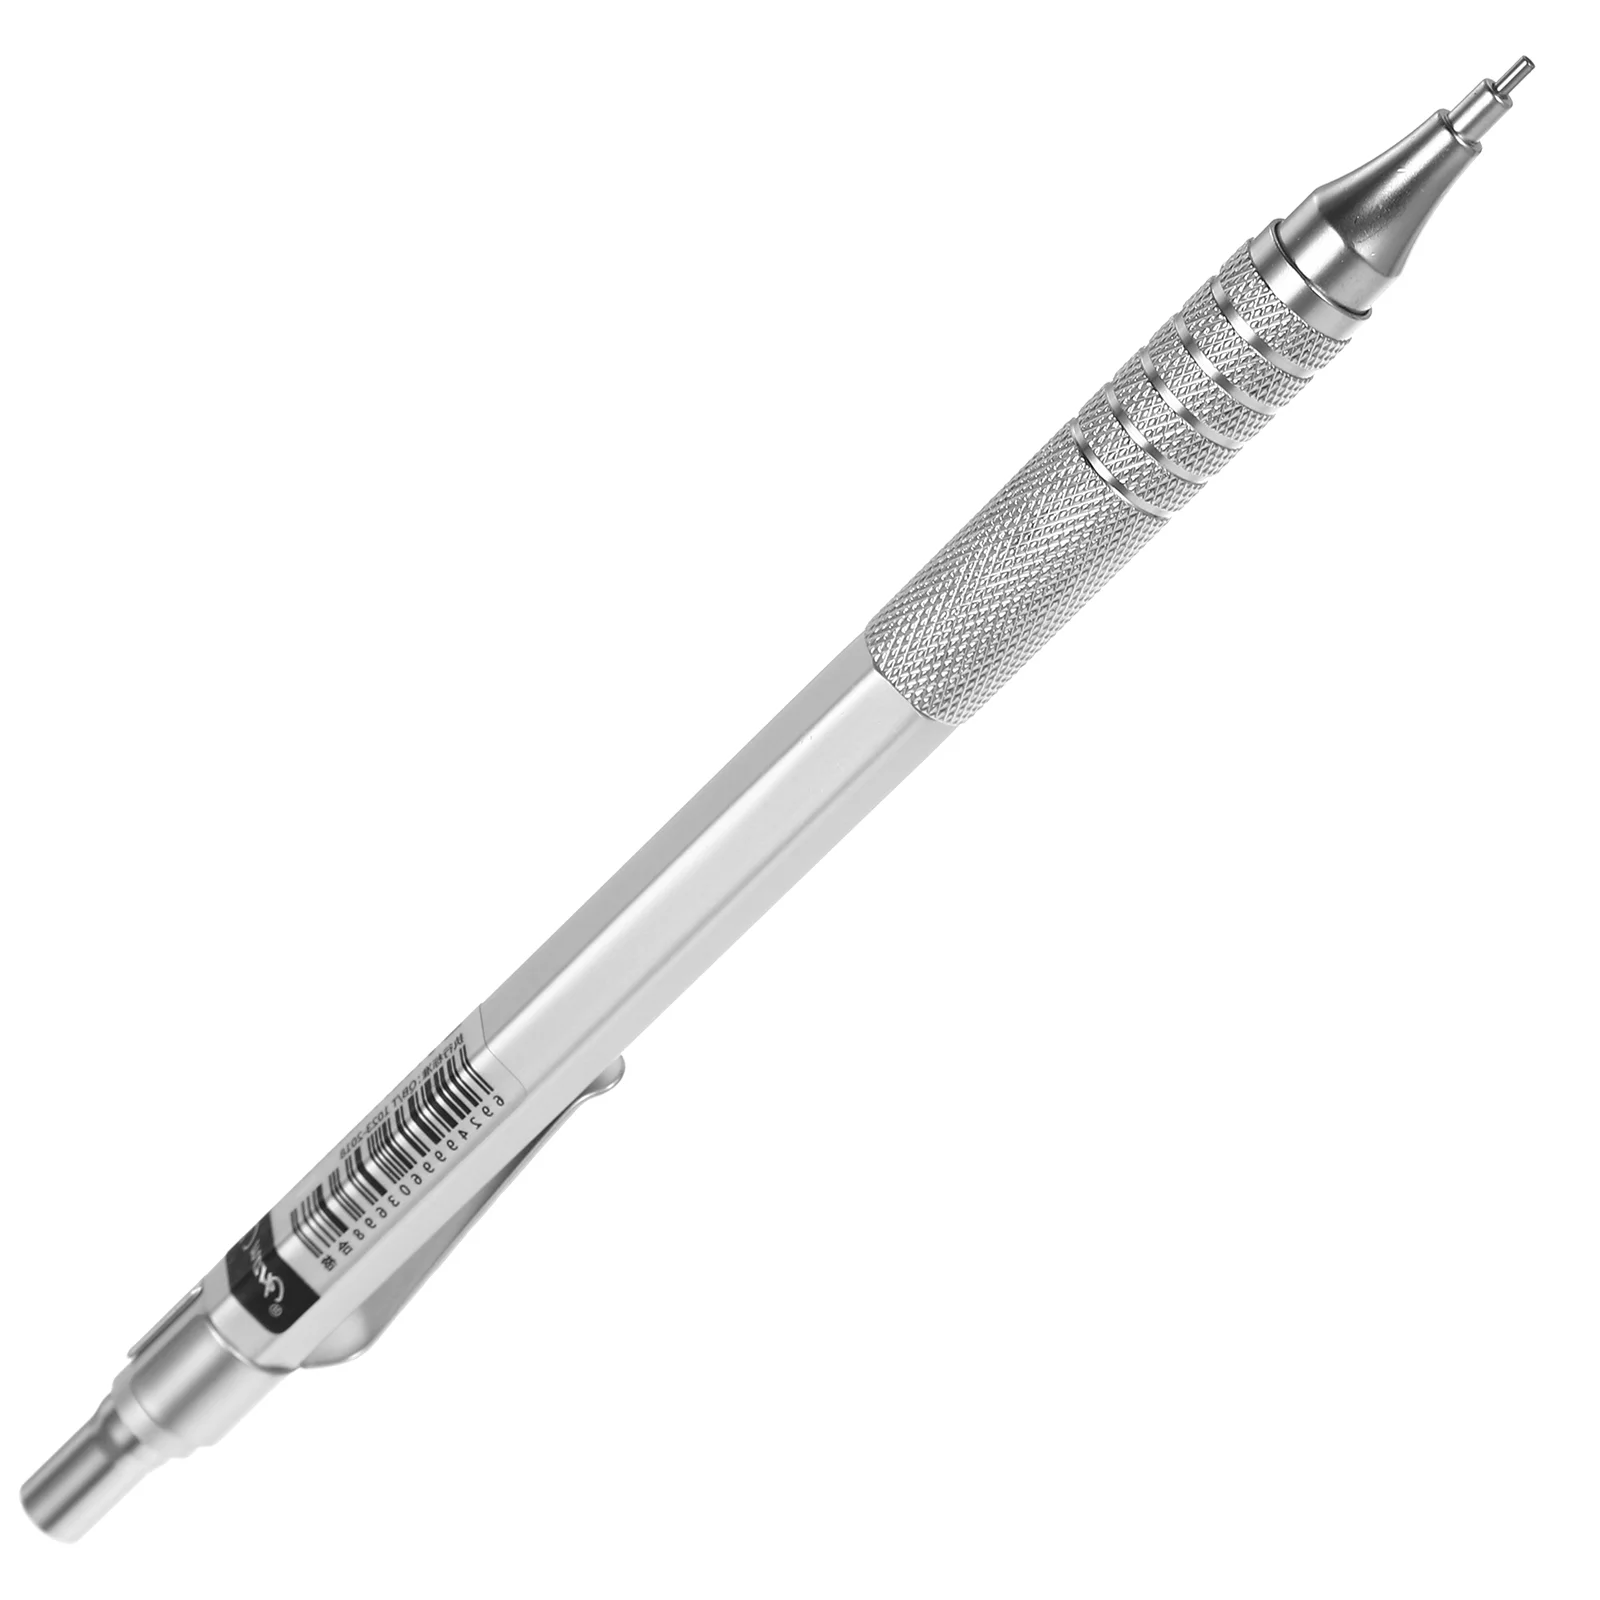 07mm Mechanical Pencil Starter Set Automatic Pencils Refill Leads for Writing Drawing Drafting(Silver)